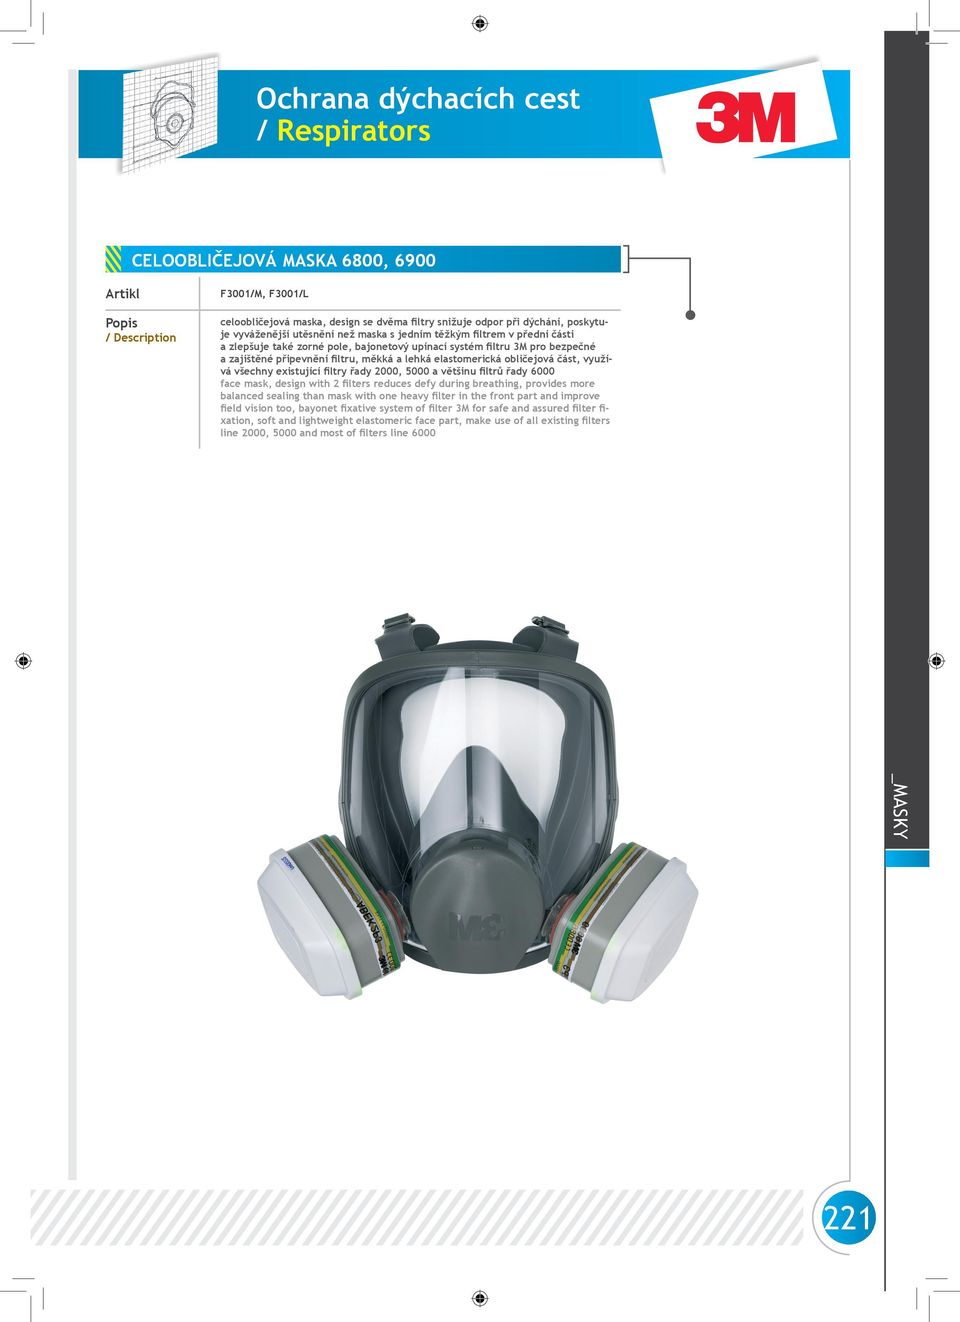 2000, 5000 a většinu filtrů řady 6000 face mask, design with 2 filters reduces defy during breathing, provides more balanced sealing than mask with one heavy filter in the front part and improve